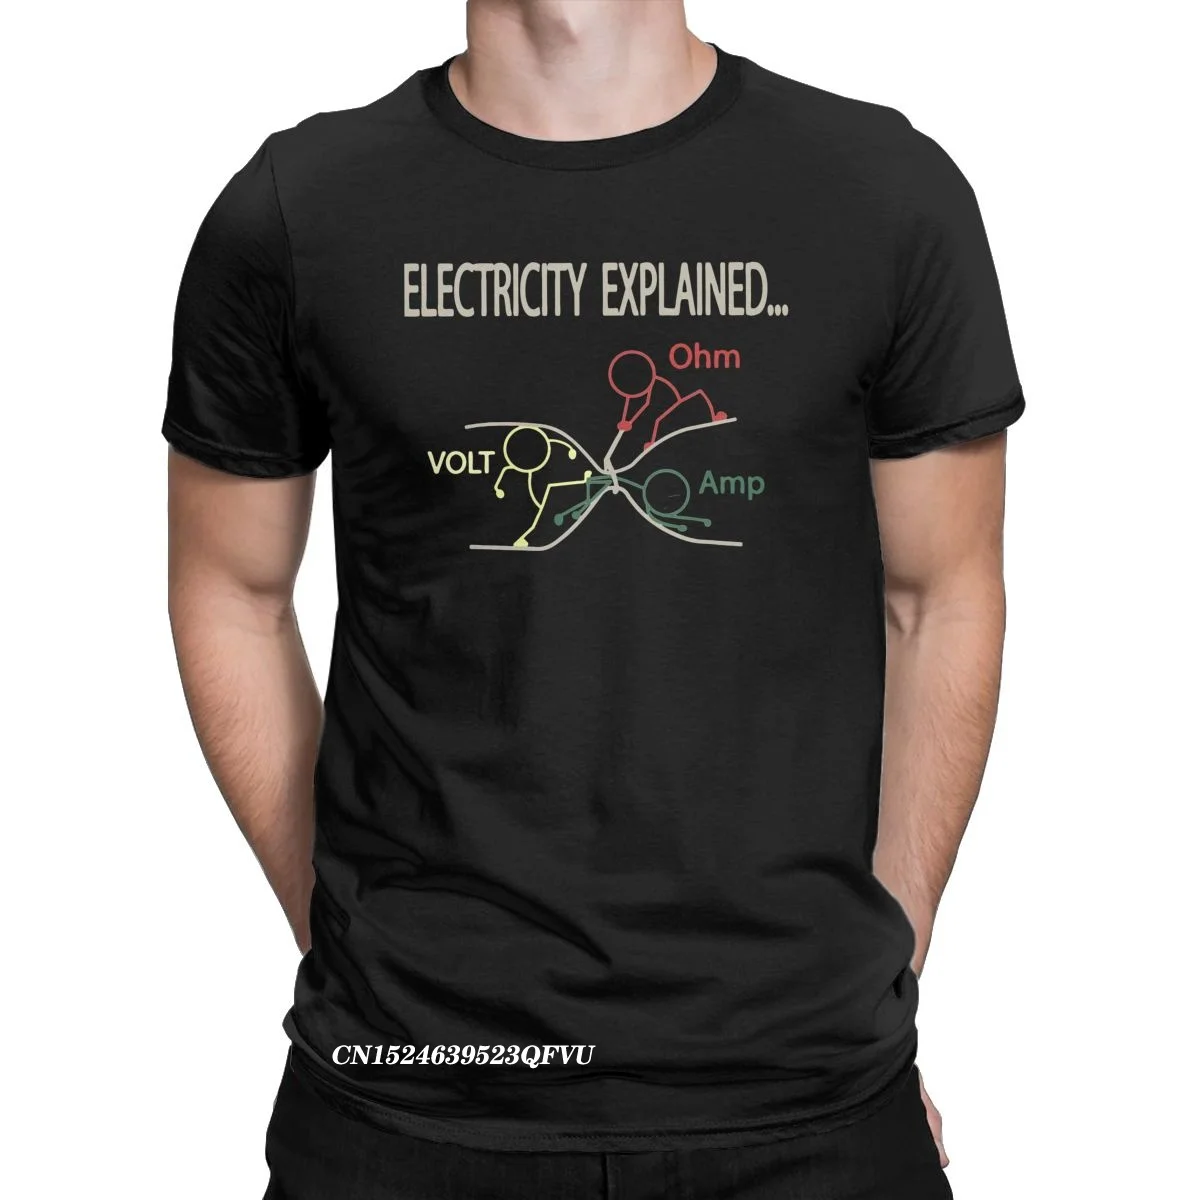 

Funny Electricity Explained Electrician Ohm Amp Volt Men's Tops T Shirts Ohm's Law Vintage Tee T-Shirts Cotton New Arrival Tops